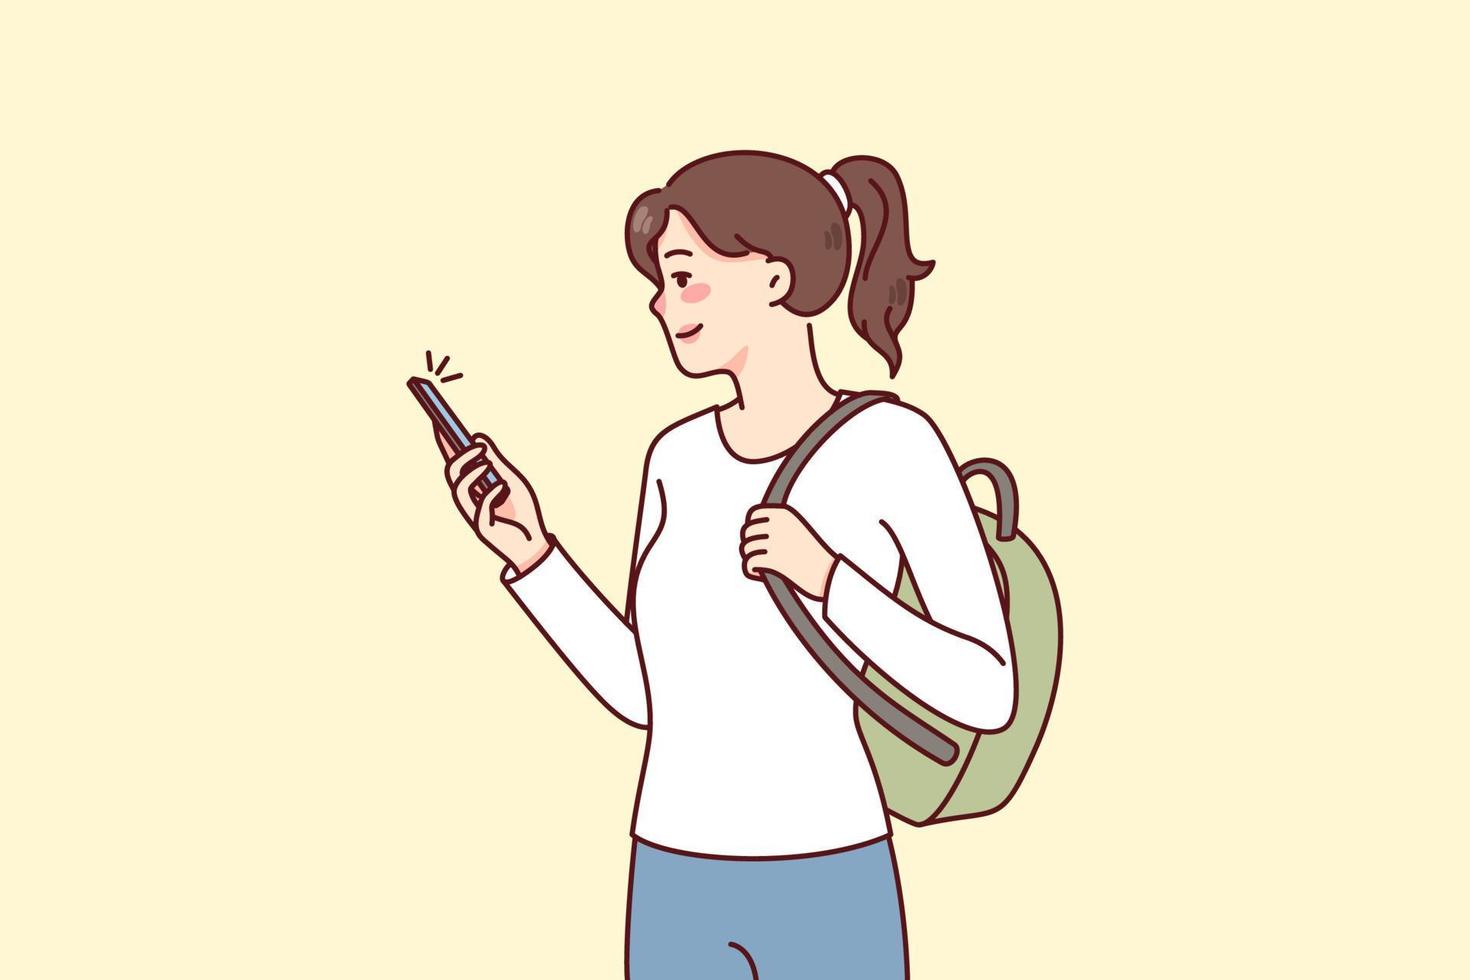 Smiling girl student with backpack using modern smartphone communicating online. Happy woman with cellphone browsing social networks on gadget. Flat vector illustration.